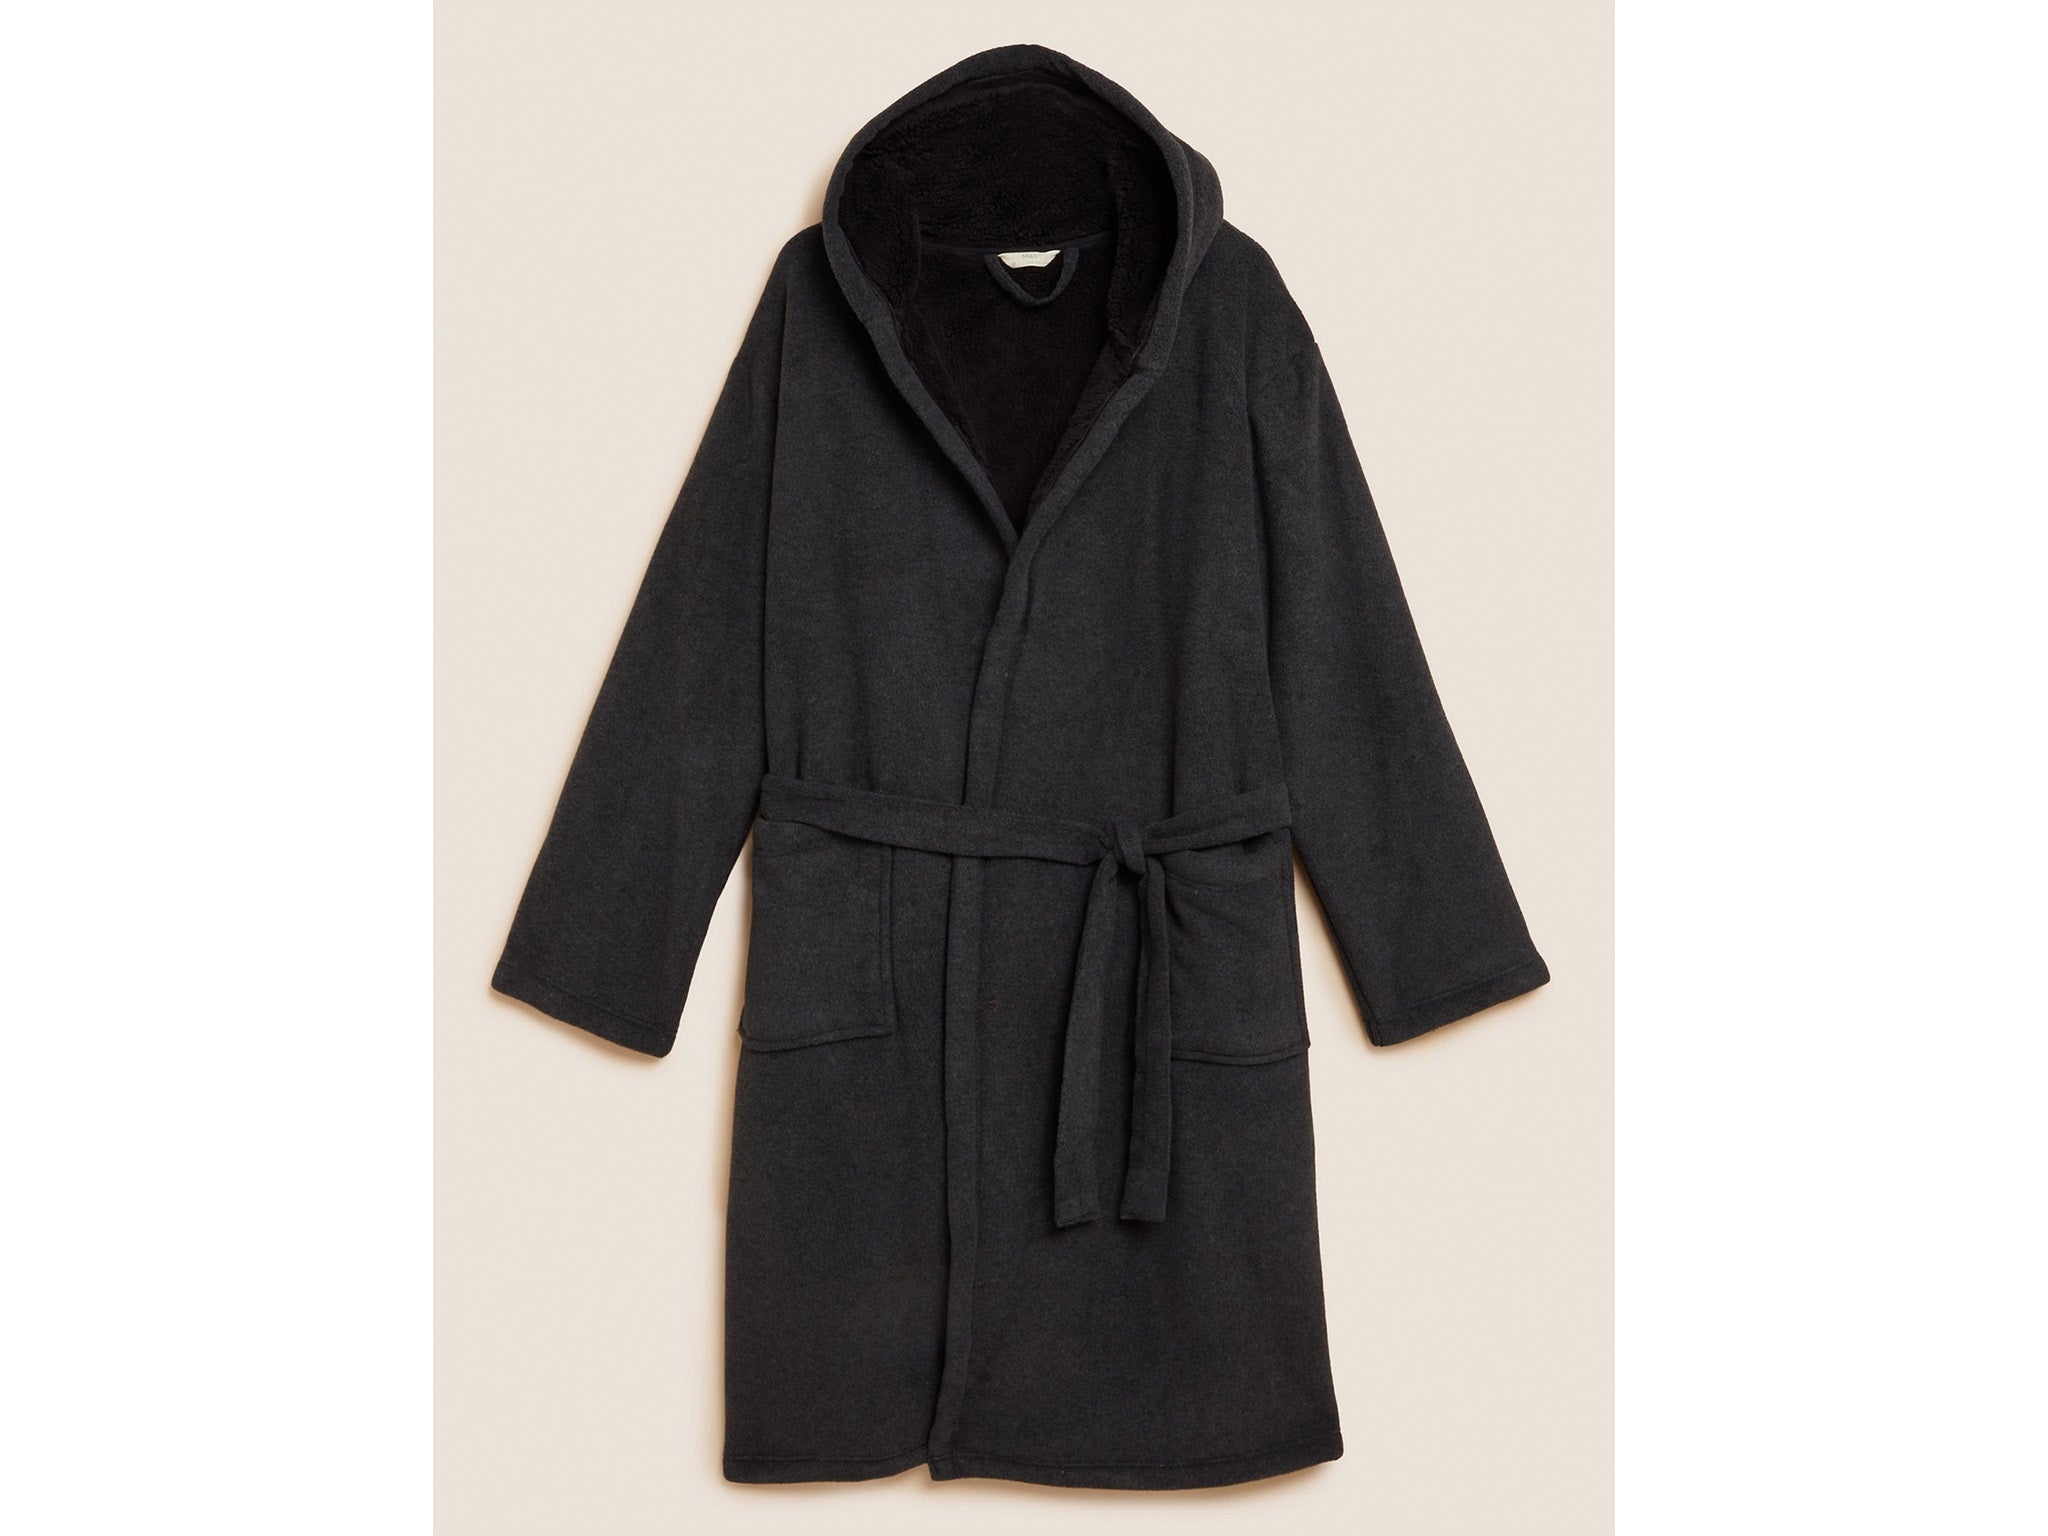 M&S fleece supersoft hooded dressing gown